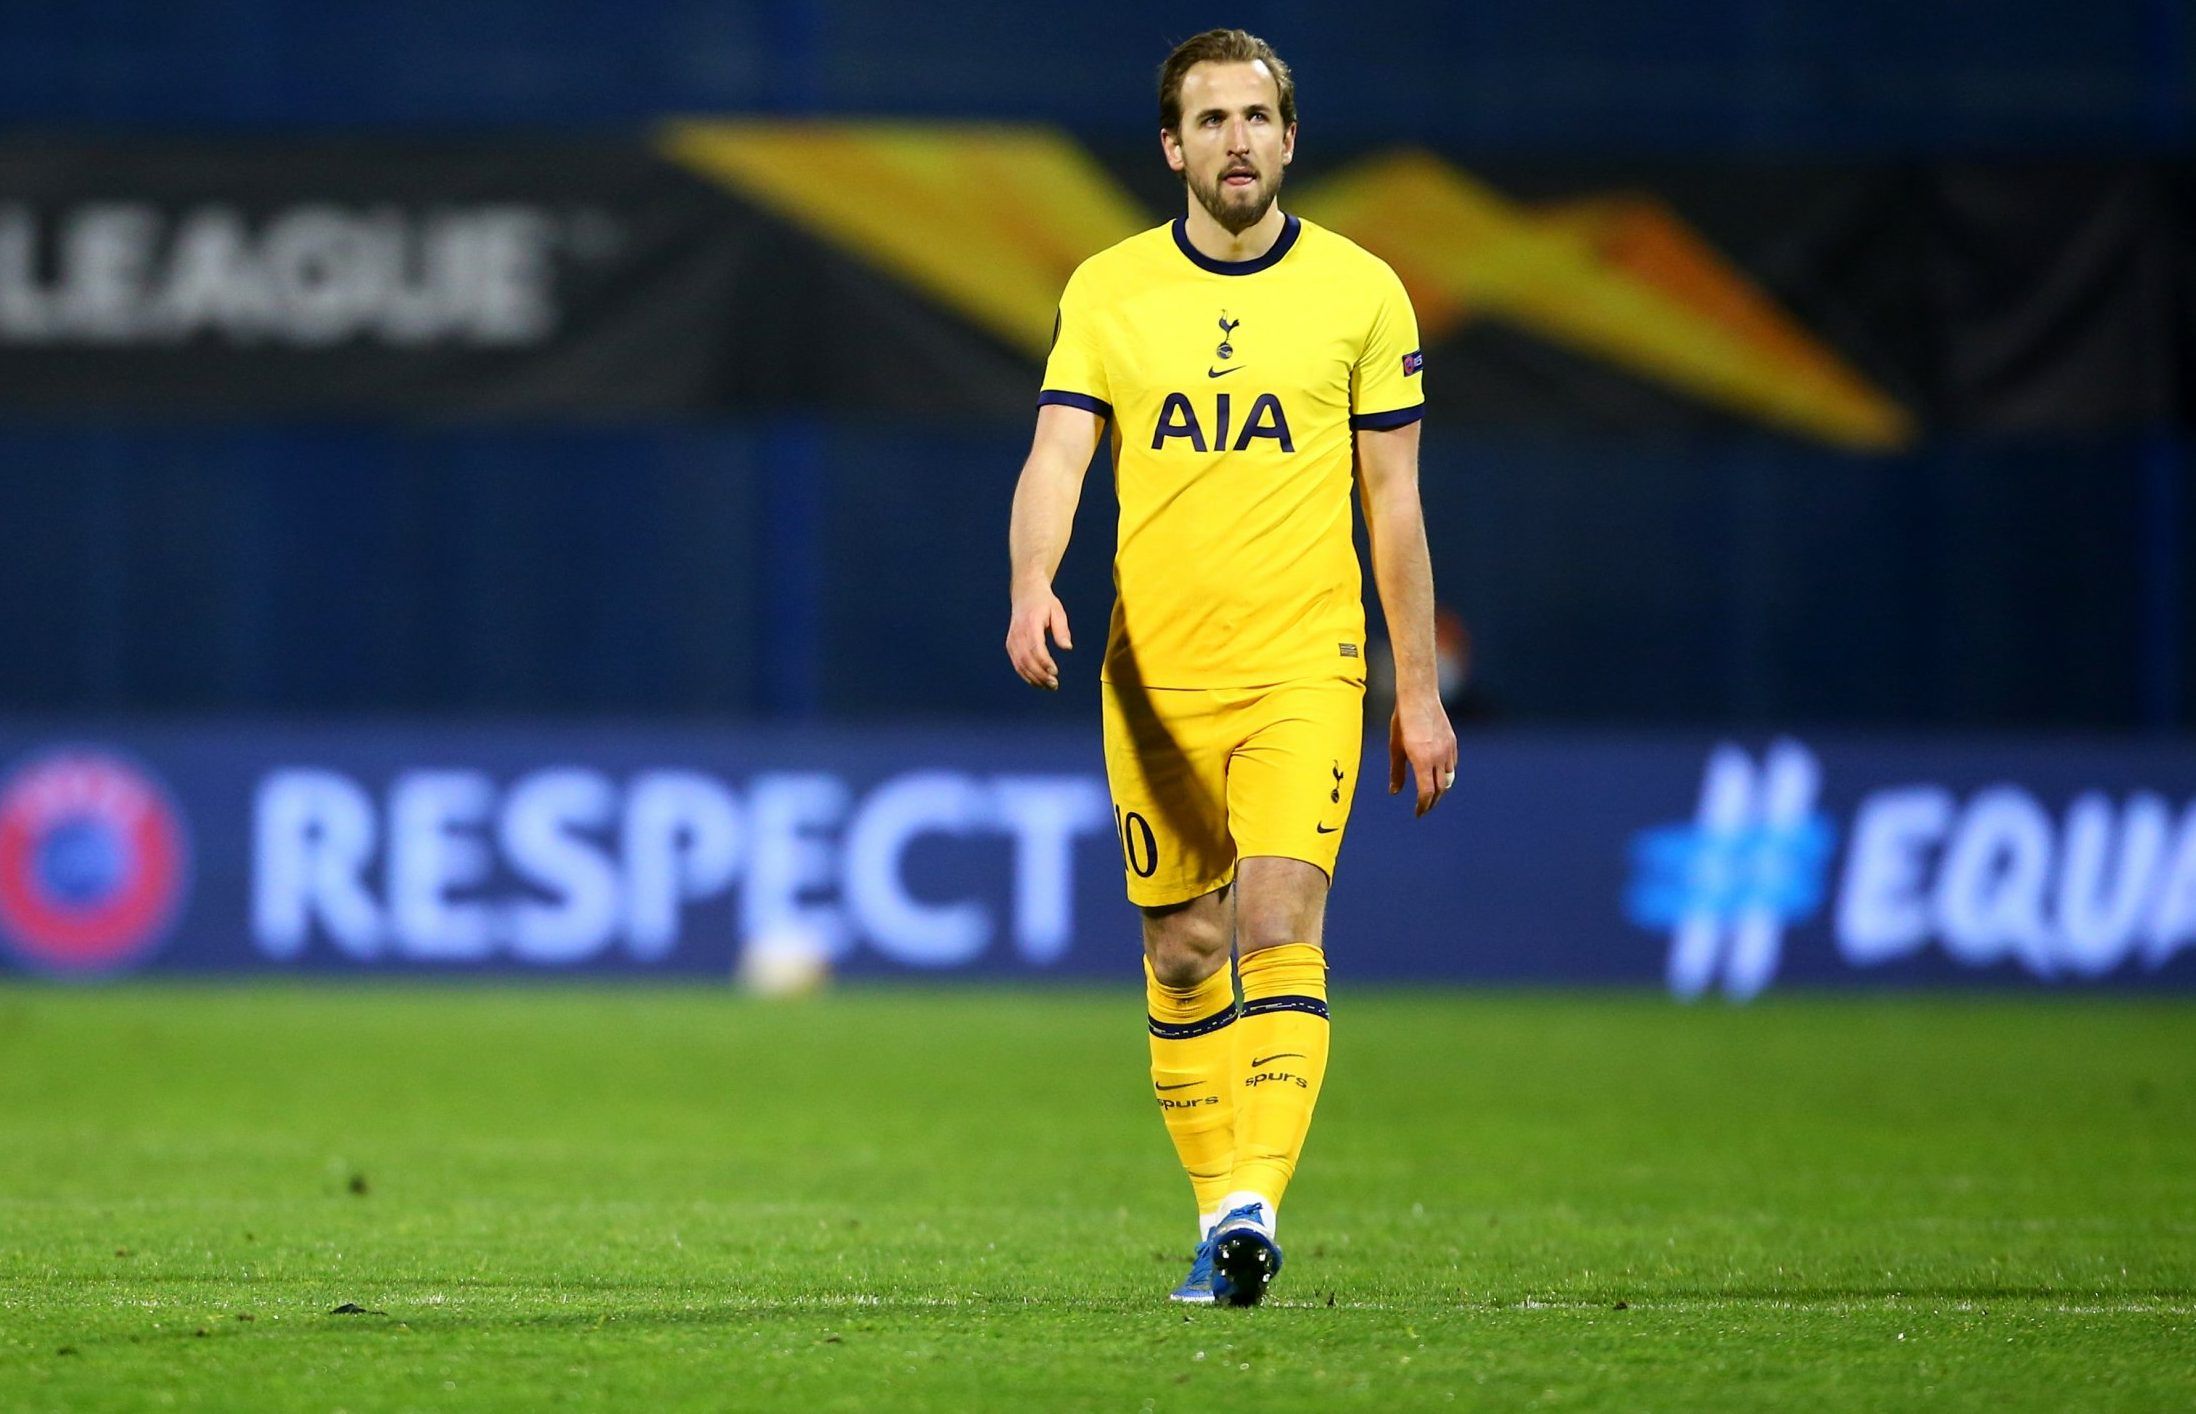 spurs star harry kane looks dejected after being knocked out of europa league by zagreb